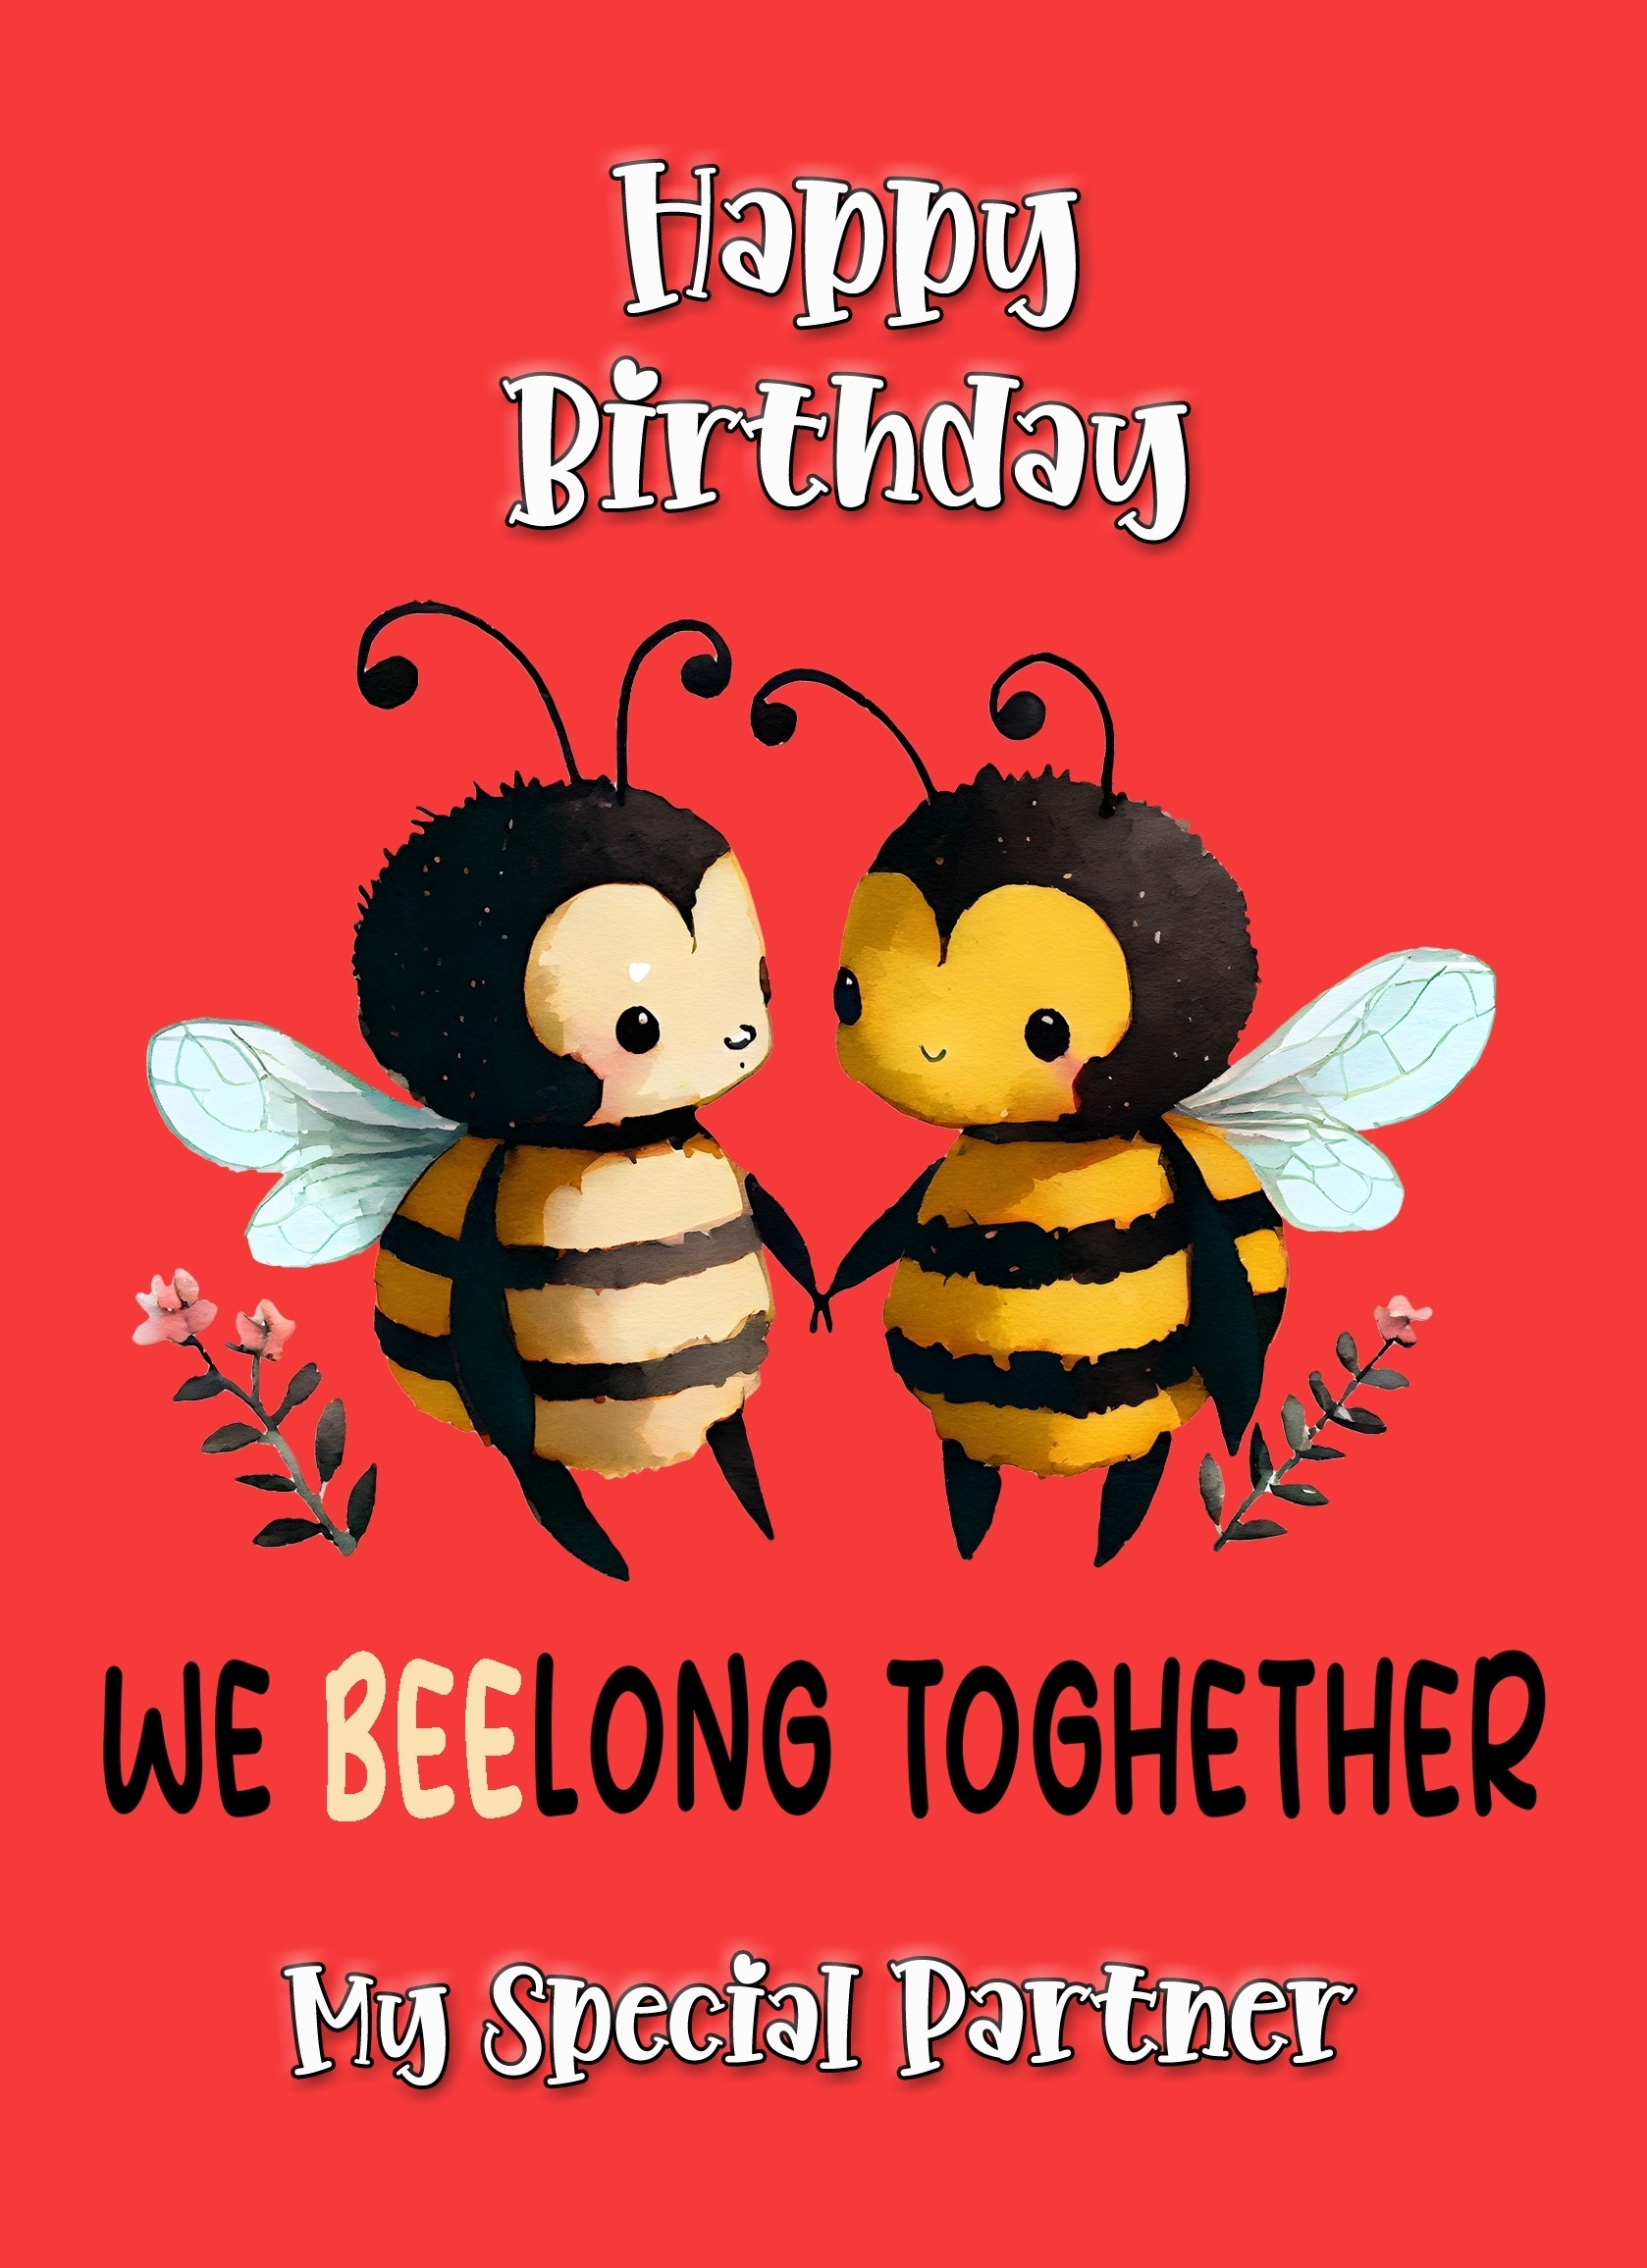 Funny Pun Romantic Birthday Card for Partner (Beelong Together)